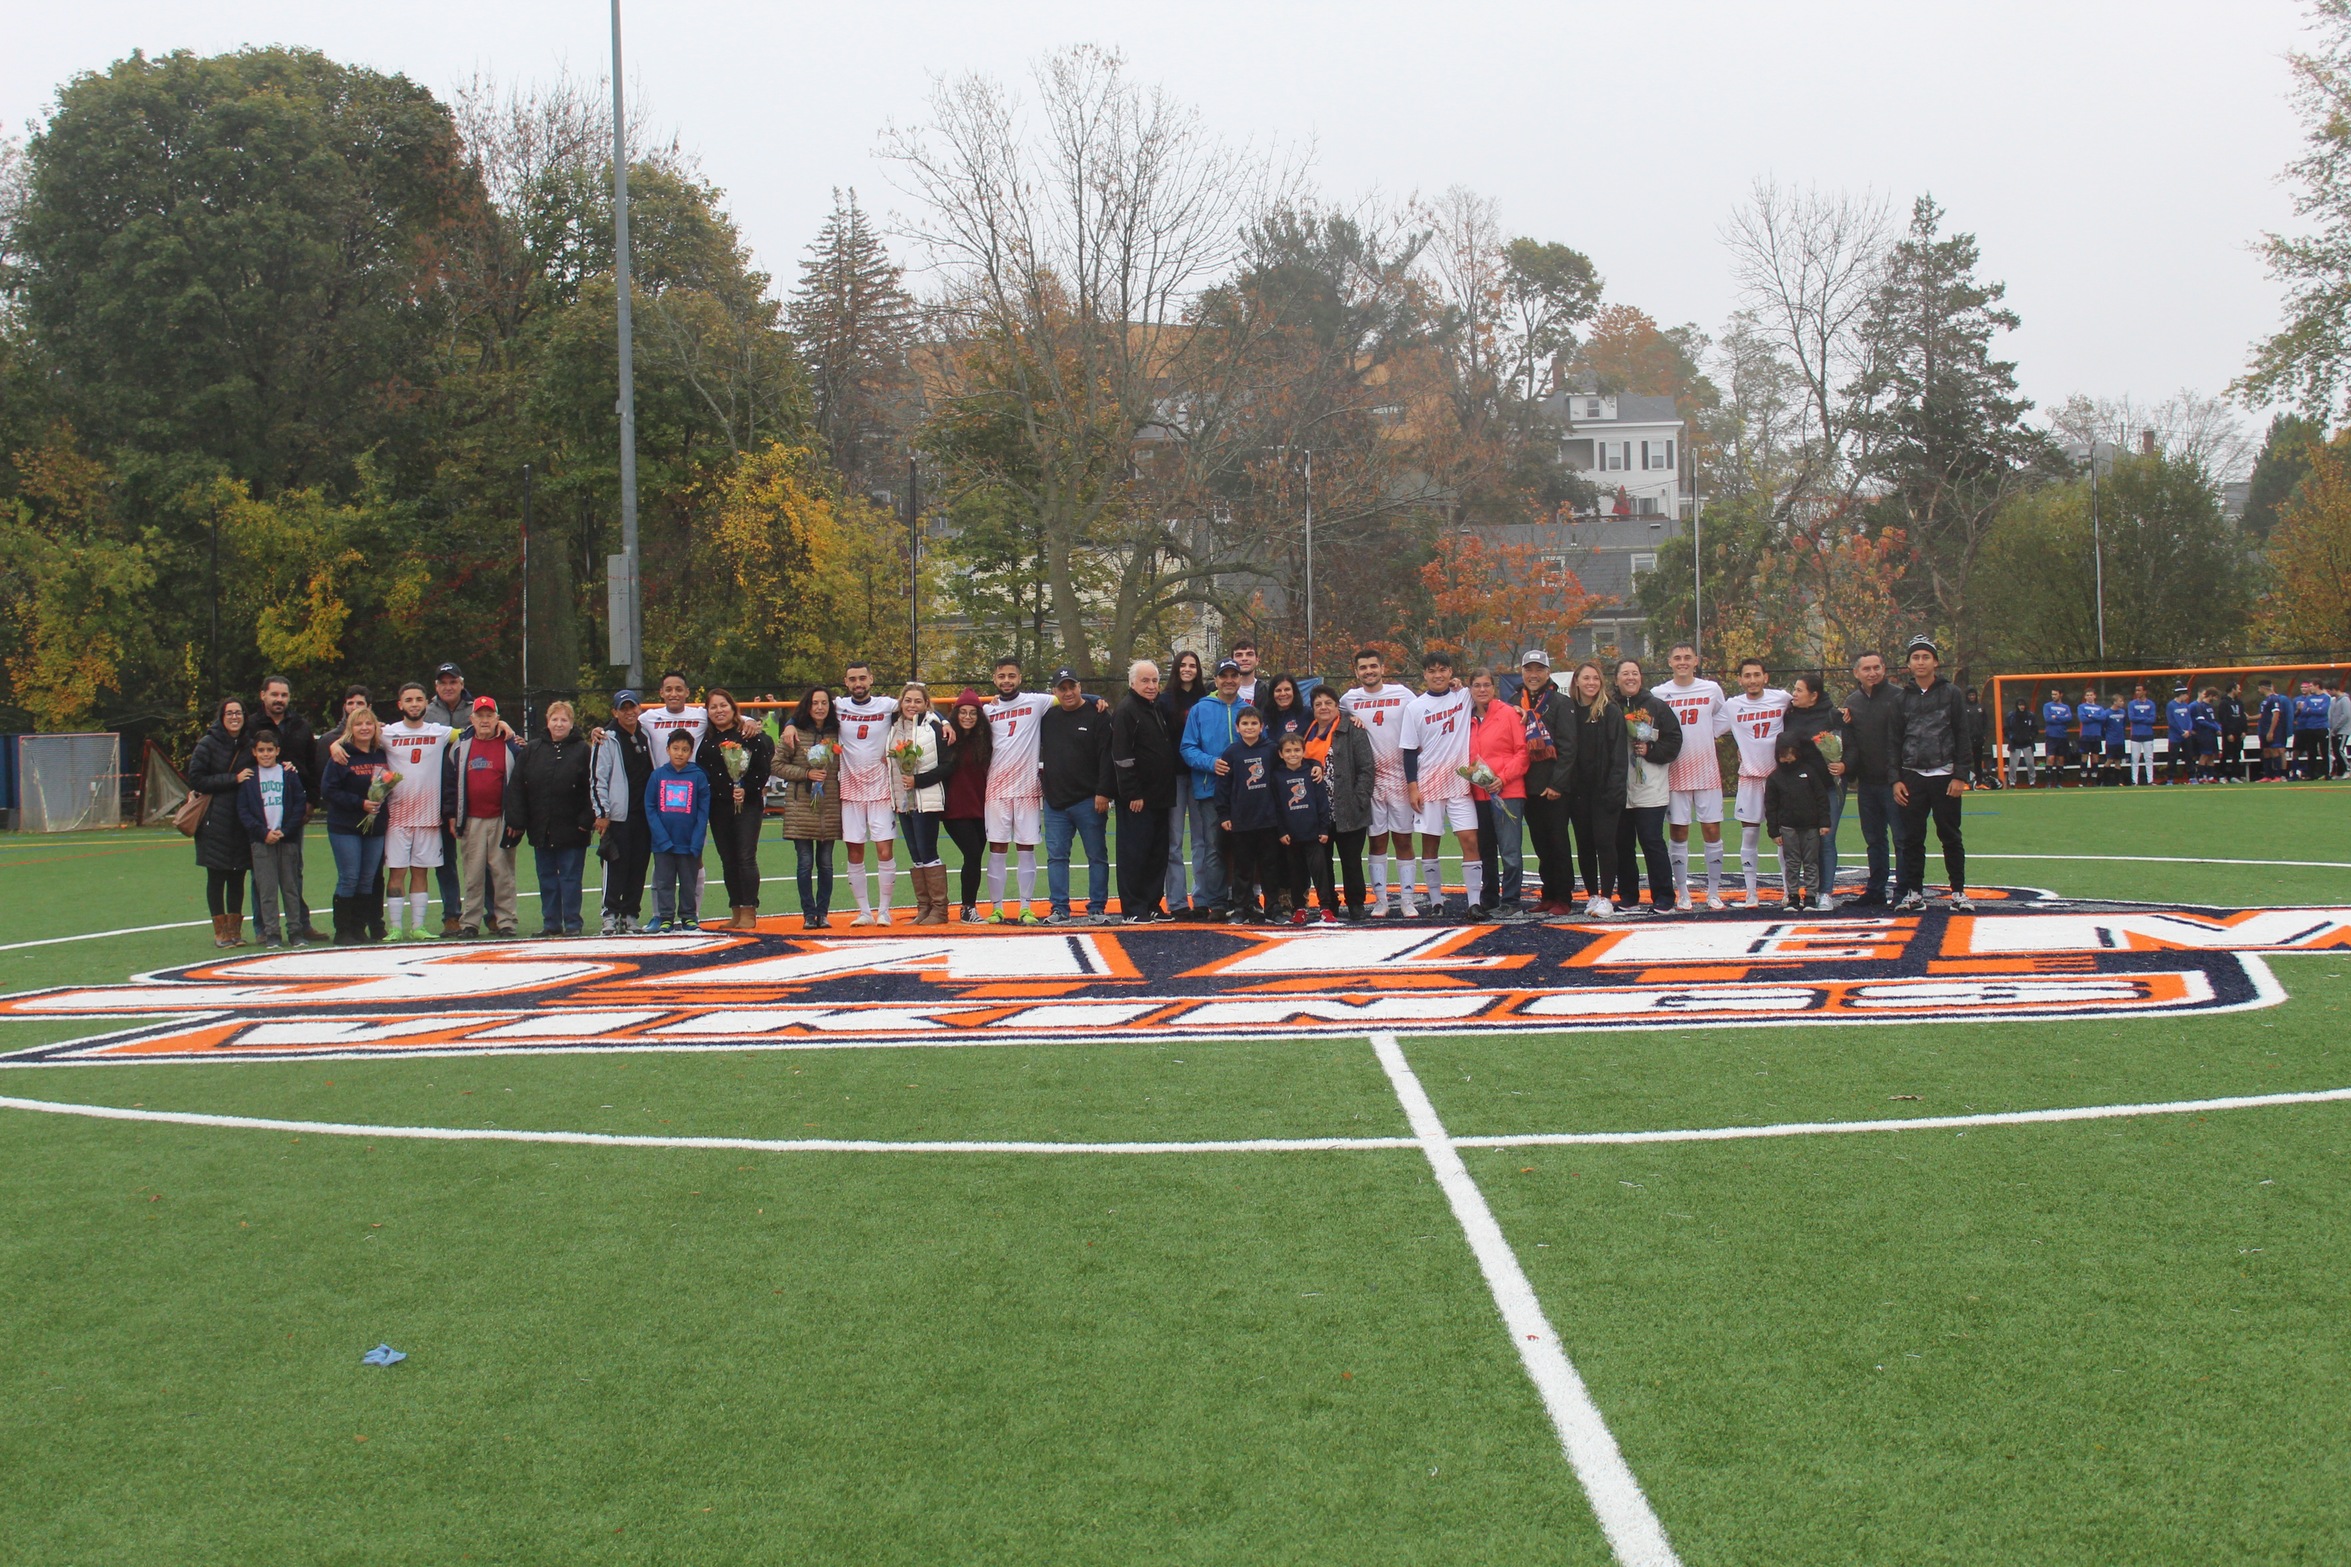 Vikings End Regular Season With Seventh Conference Shutout, Blanking Westfield State 4-0 On Senior Day